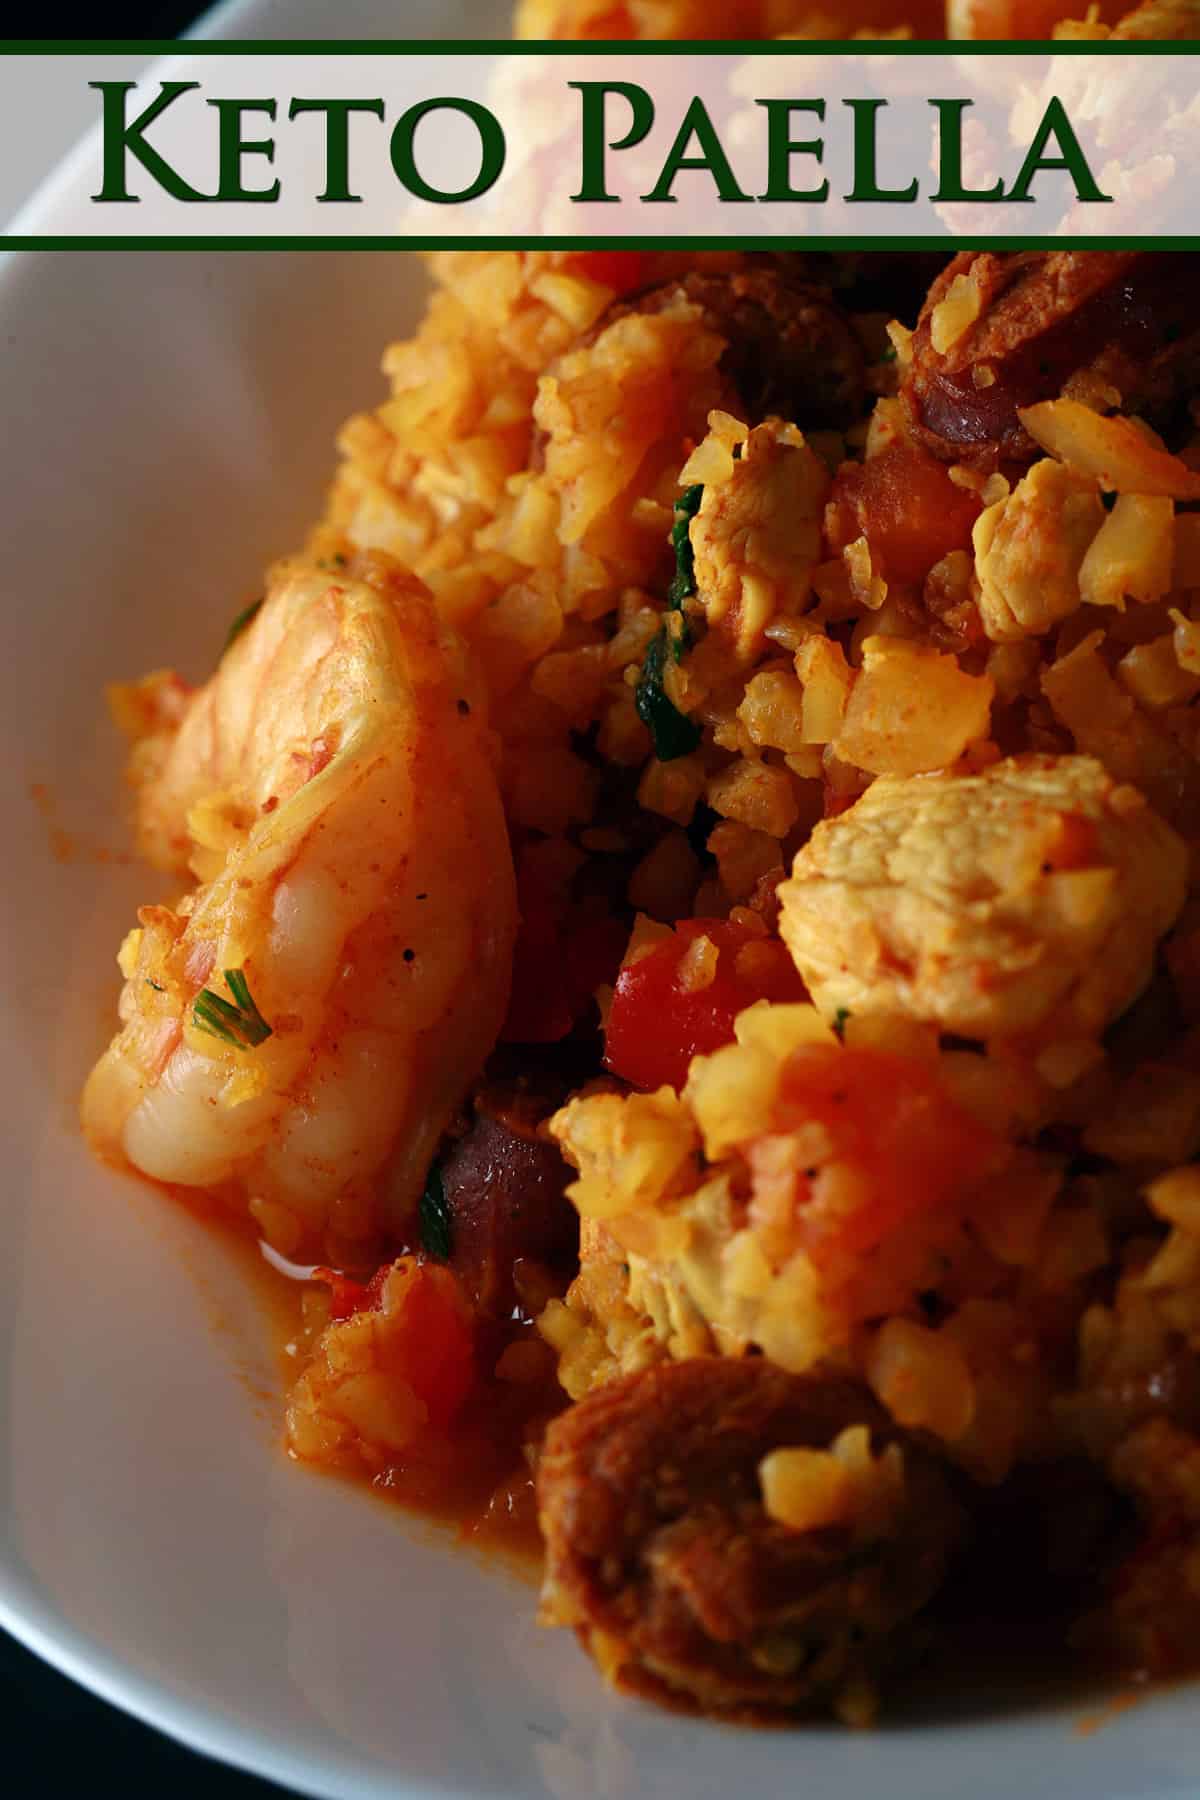 A bowl of cauliflower paella, with shrimp, chicken, and chorizo visible.